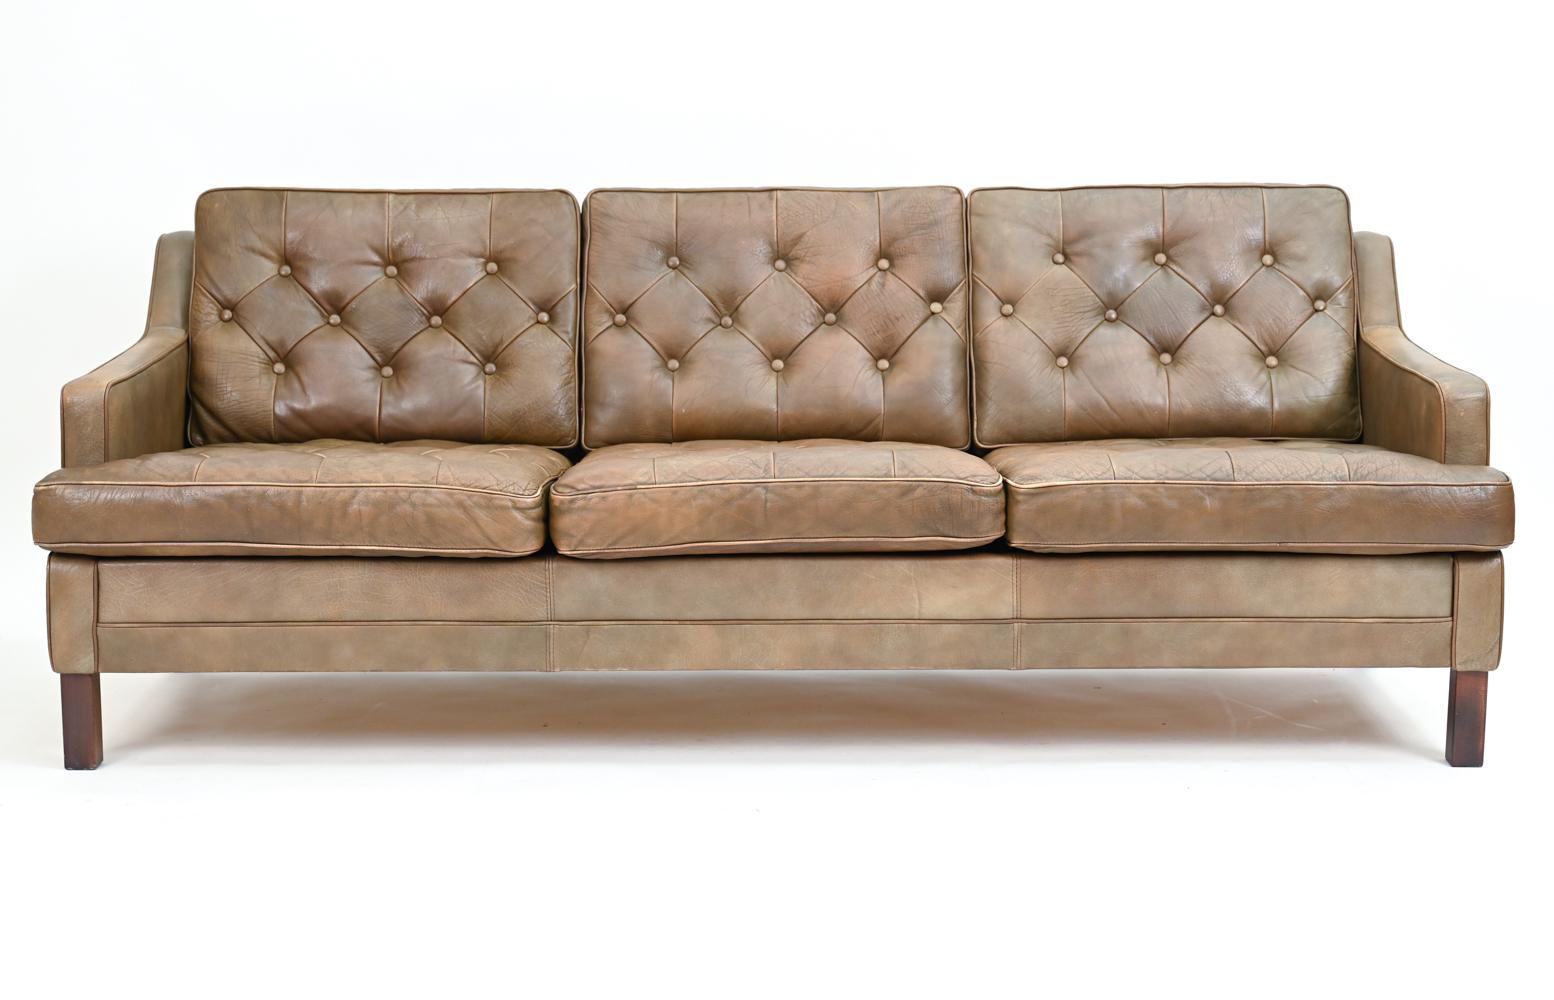 A fabulous Danish mid-century button-tufted three-seater sofa in supple brown leather, in the manner of Arne Norell's iconic 